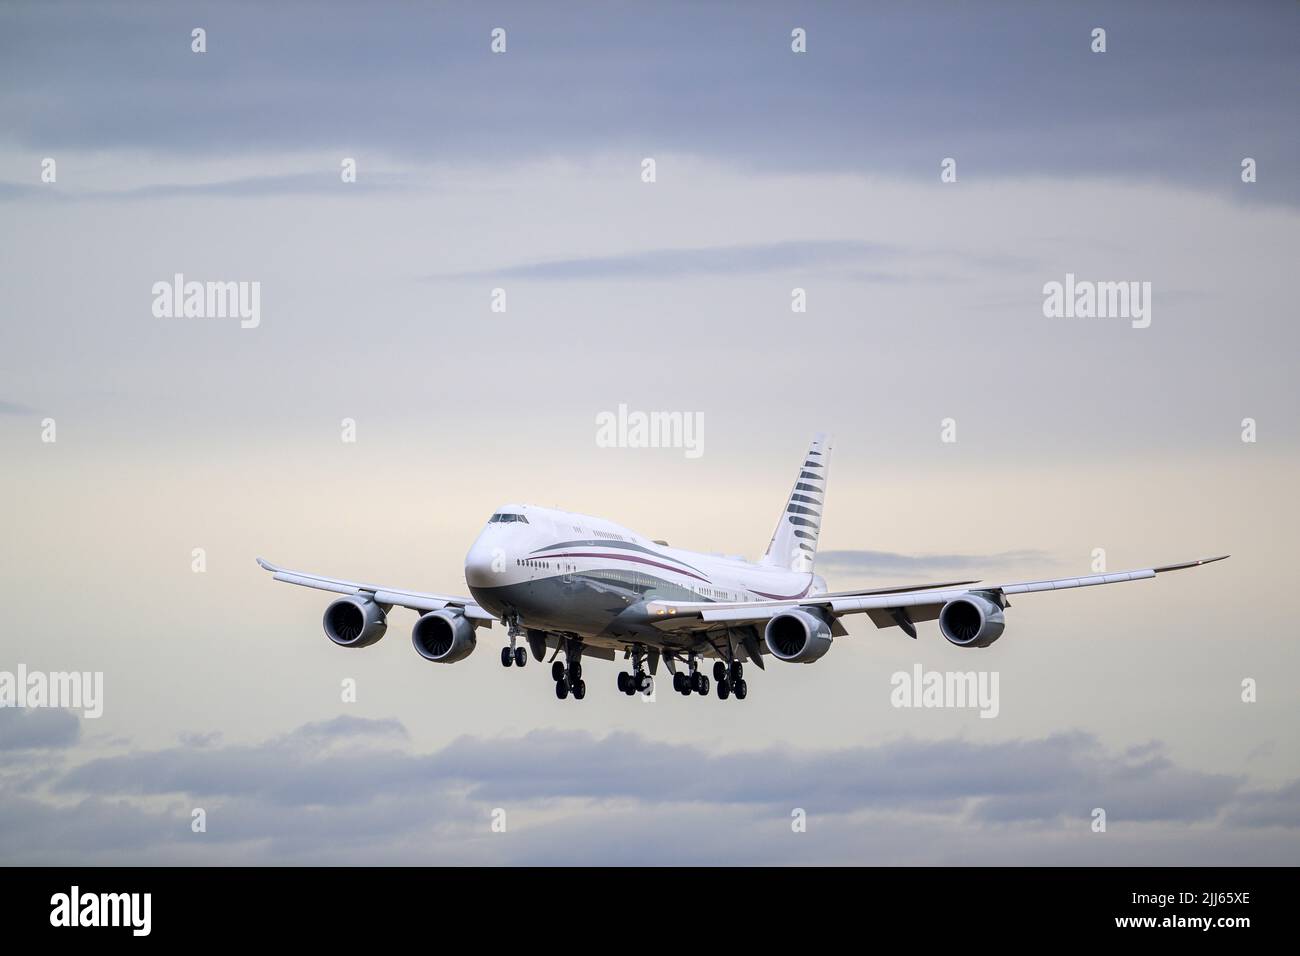 Qatar Amiri Flight Boeing 747-8 With The Aircraft Registration A7-HBJ Is  Landing On The Southern Runway 26L Of The Munich Airport MUC EDDM Stock  Photo - Alamy